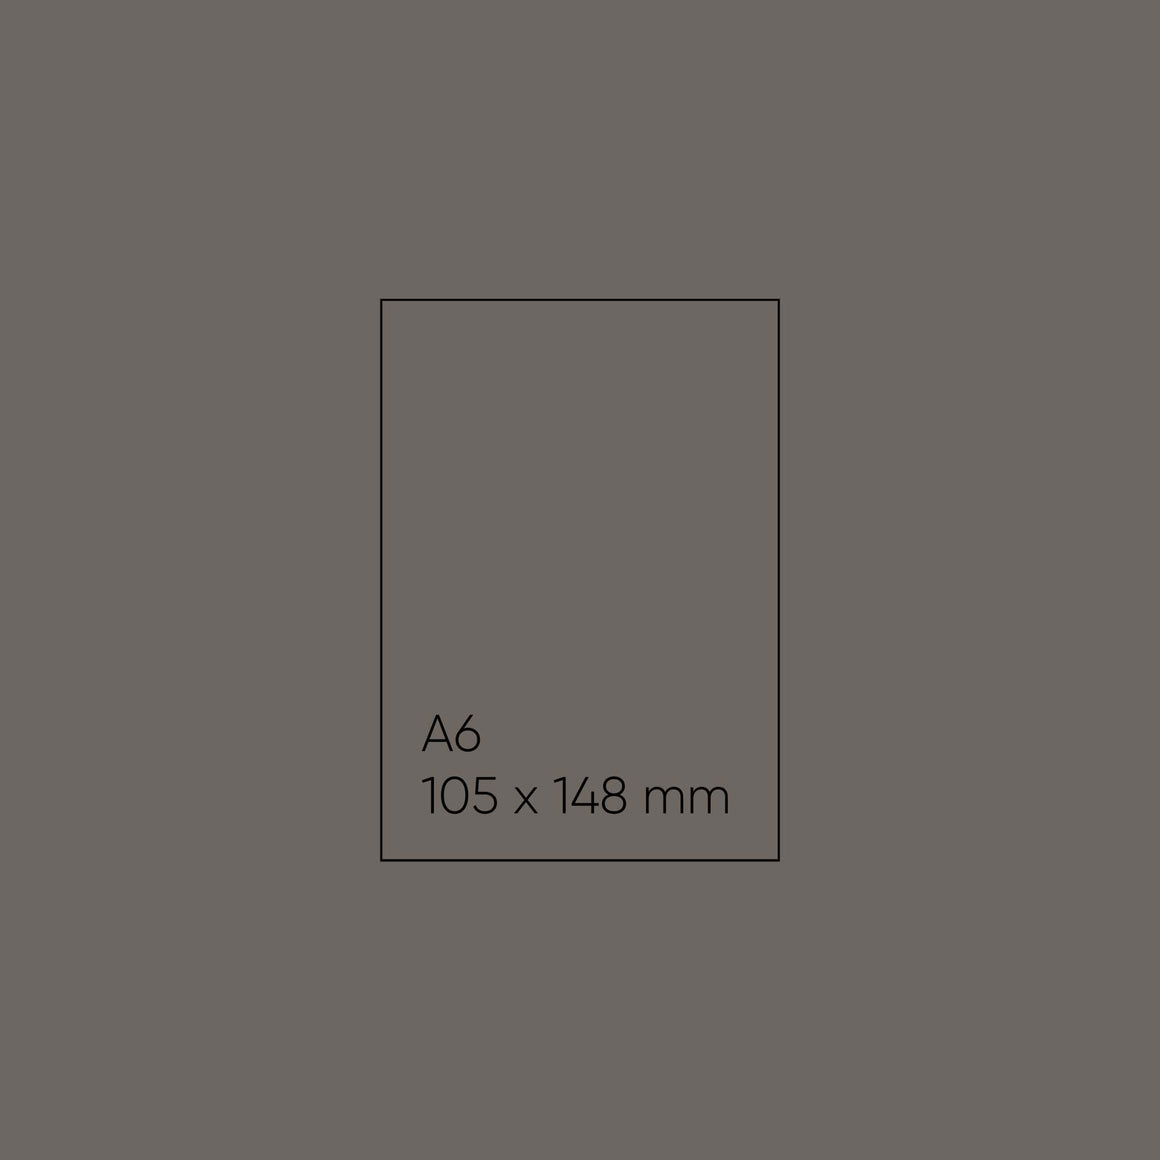 Blank Note Cards - A6 (105 x 148mm), Flat, Environment Concrete, Pack of 15